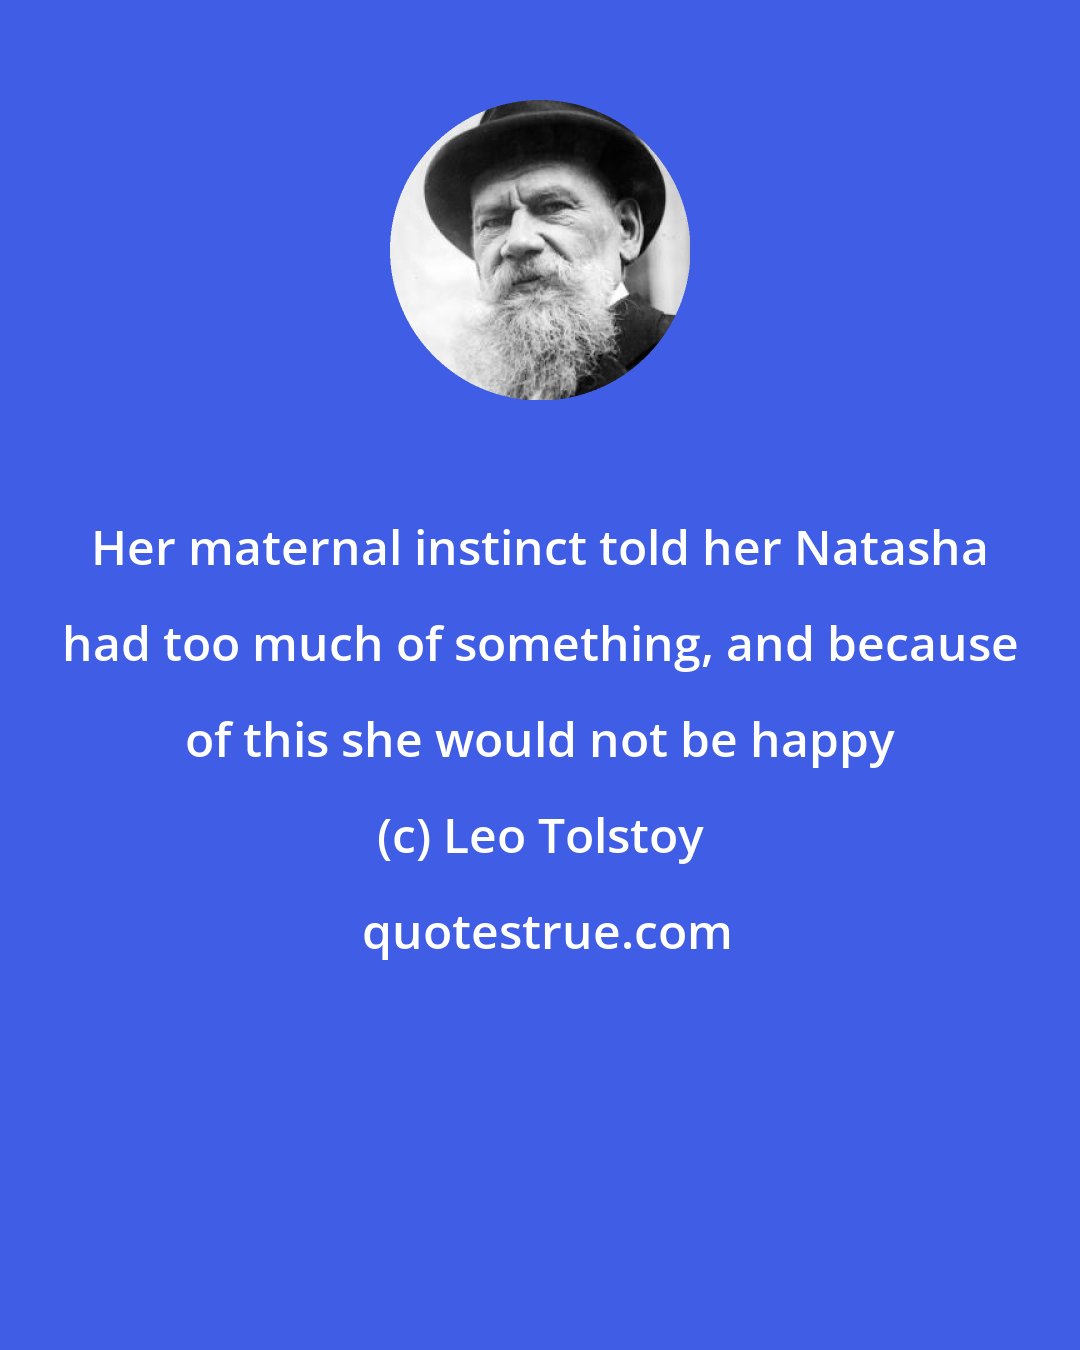 Leo Tolstoy: Her maternal instinct told her Natasha had too much of something, and because of this she would not be happy